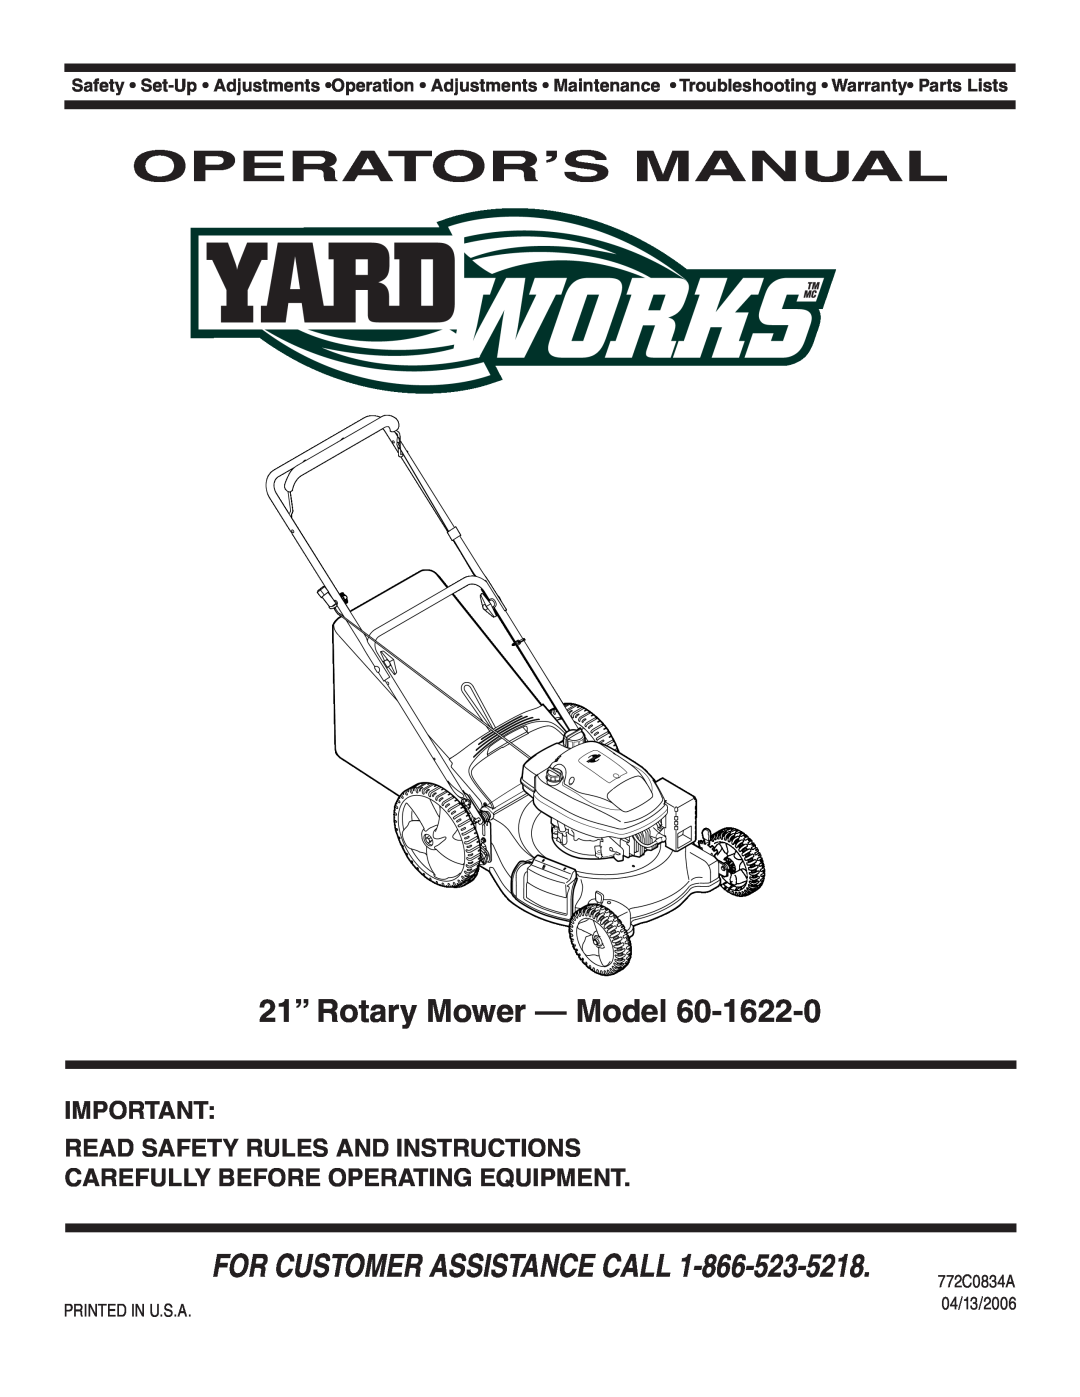 MTD 60-1622-0 warranty Operator’S Manual, 21” Rotary Mower - Model, For Customer Assistance Call, 772C0834A 04/13/2006 